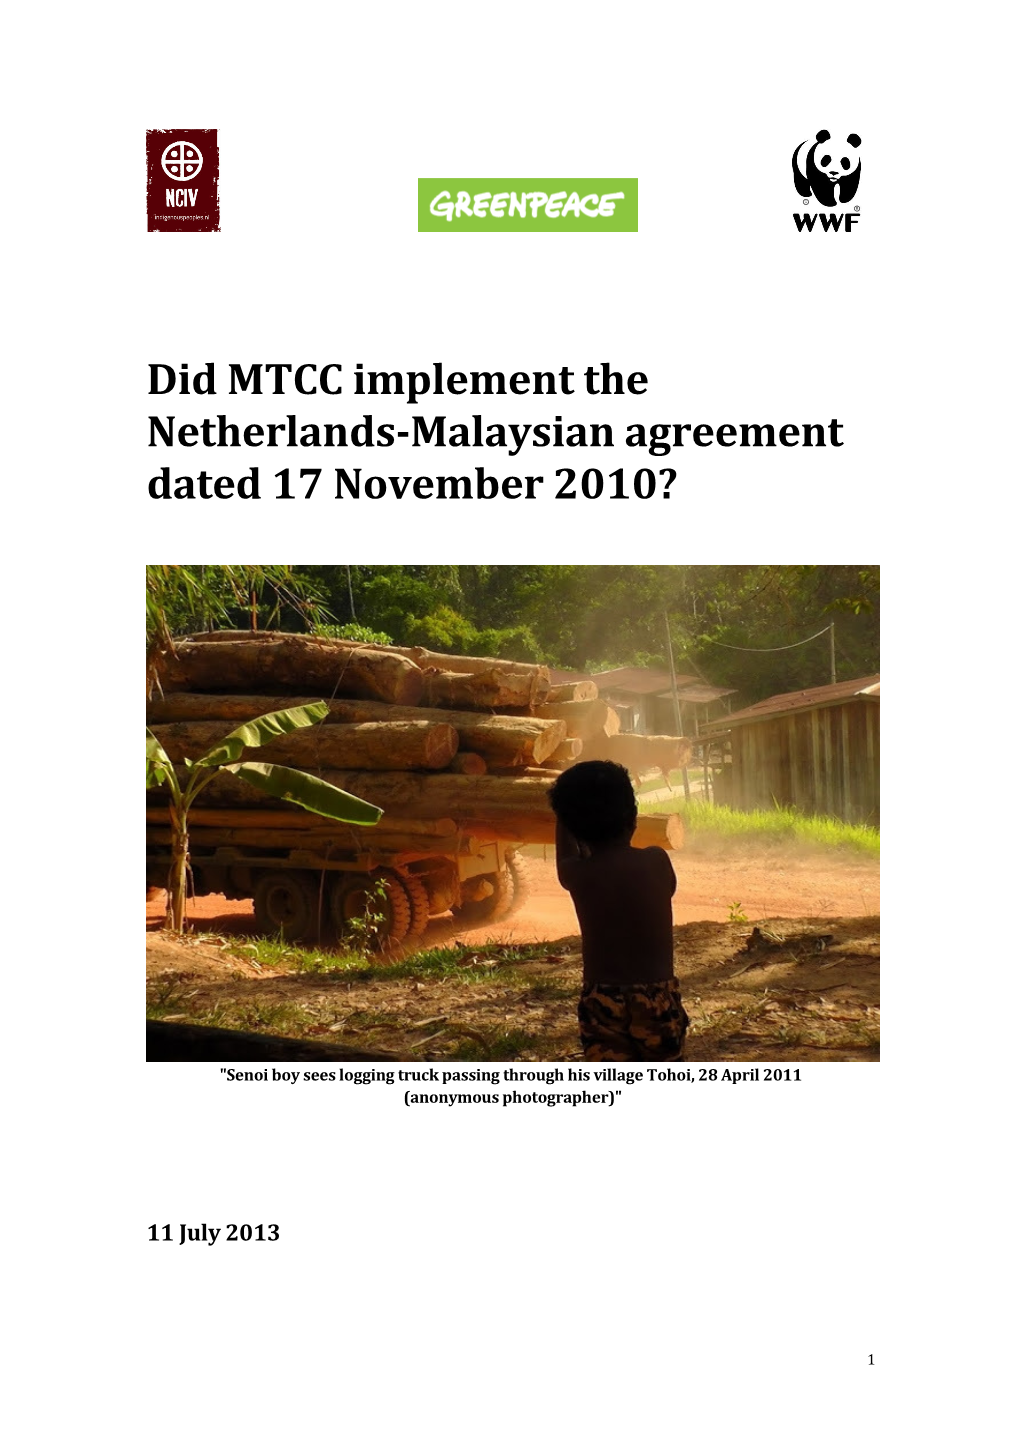 Did MTCC Implement the Netherlands-Malaysian Agreement Dated 17 November 2010?